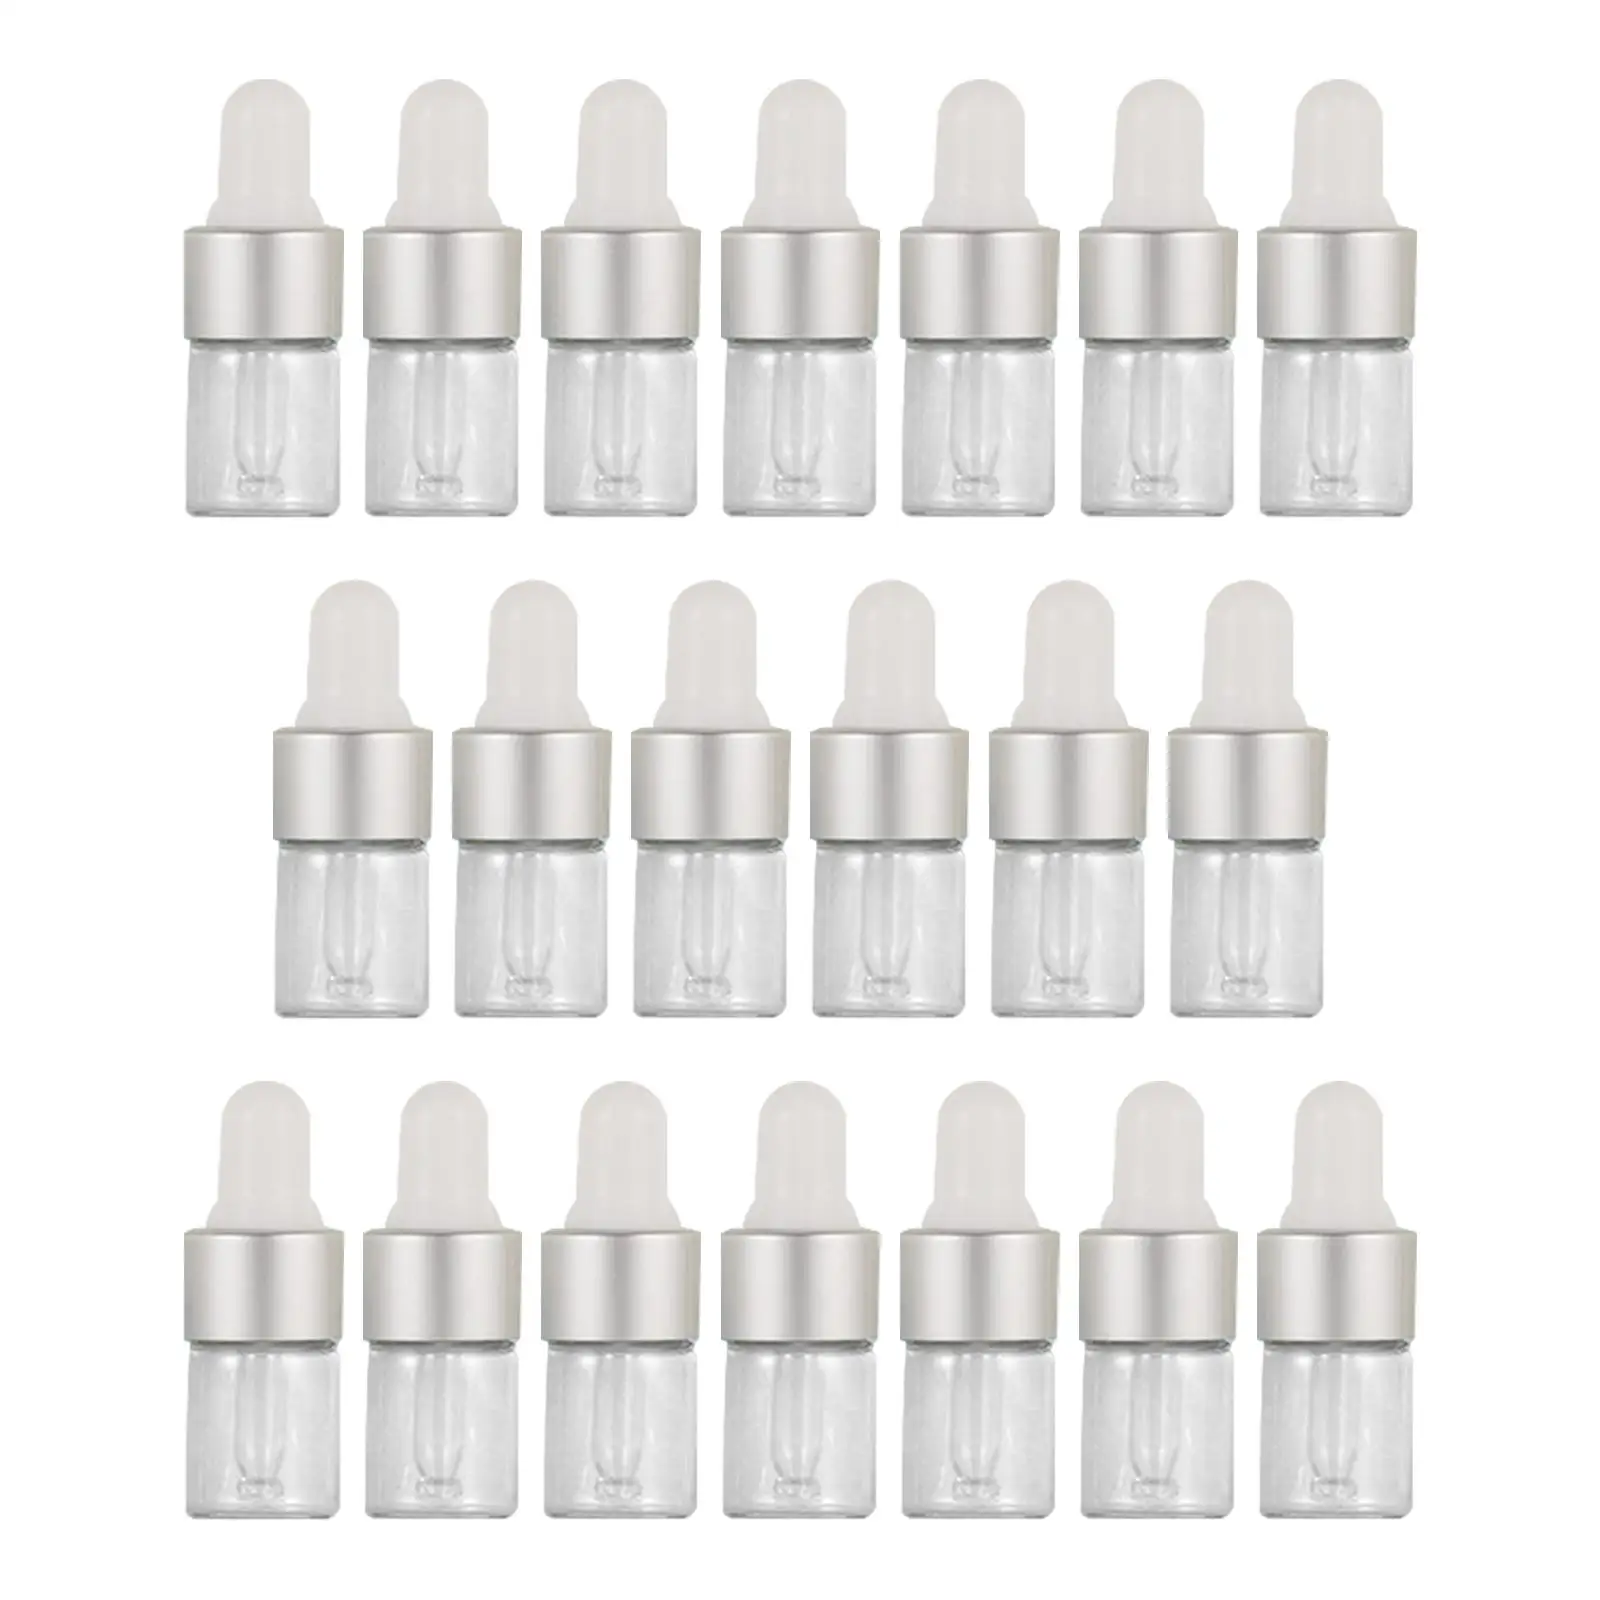 20 Pieces glass Dropper Bottles with Glass Eye Droppers for Liquids